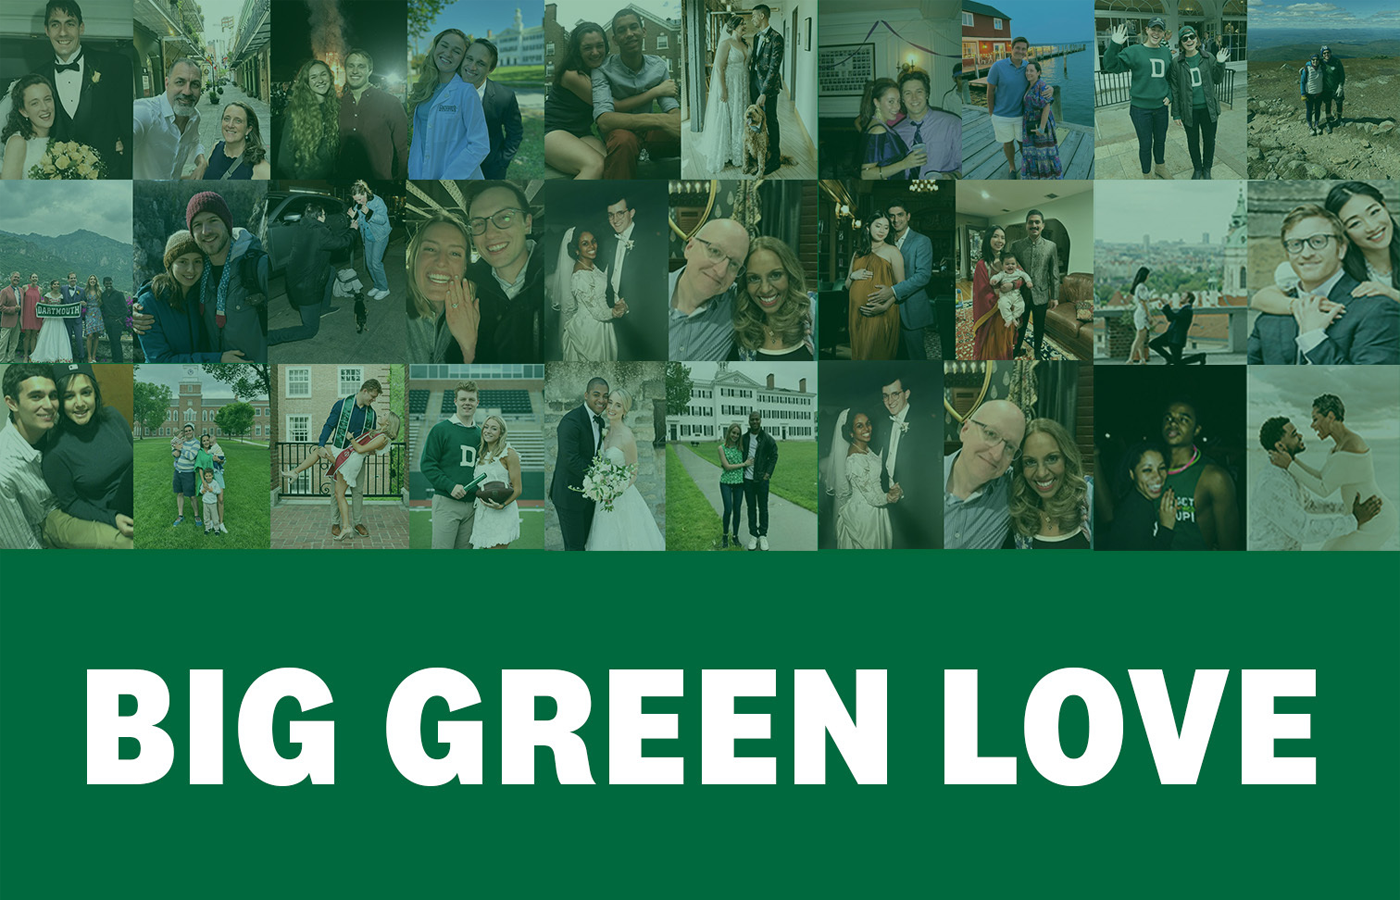 Big Green Love collage of photos